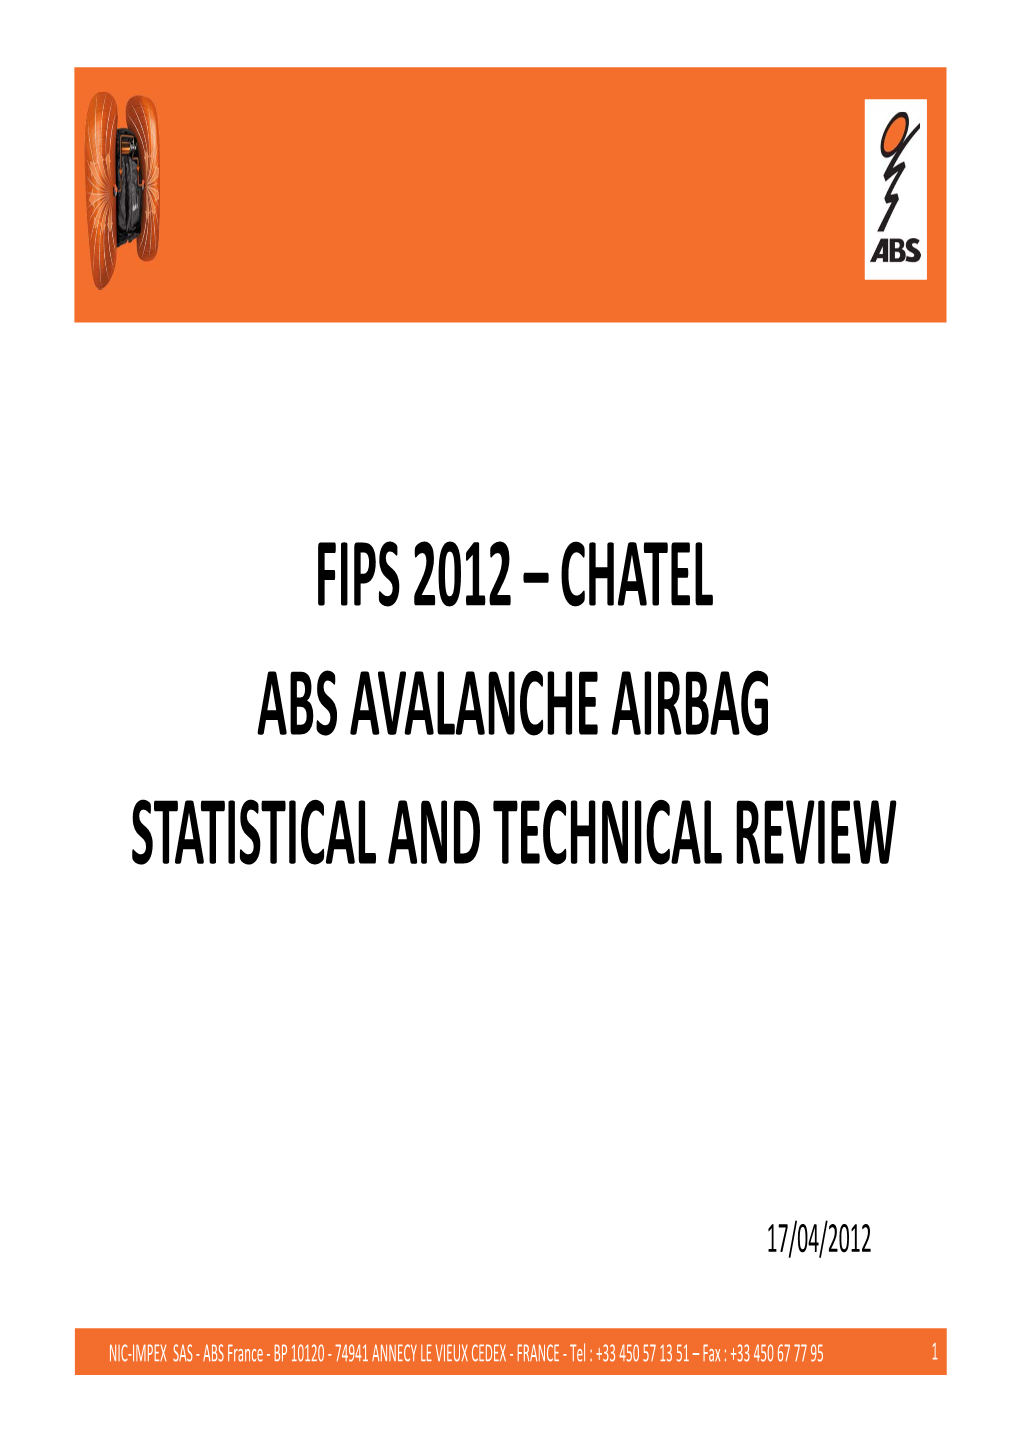 Fips 2012 – Chatel Abs Avalanche Airbag Statistical and Technical Review